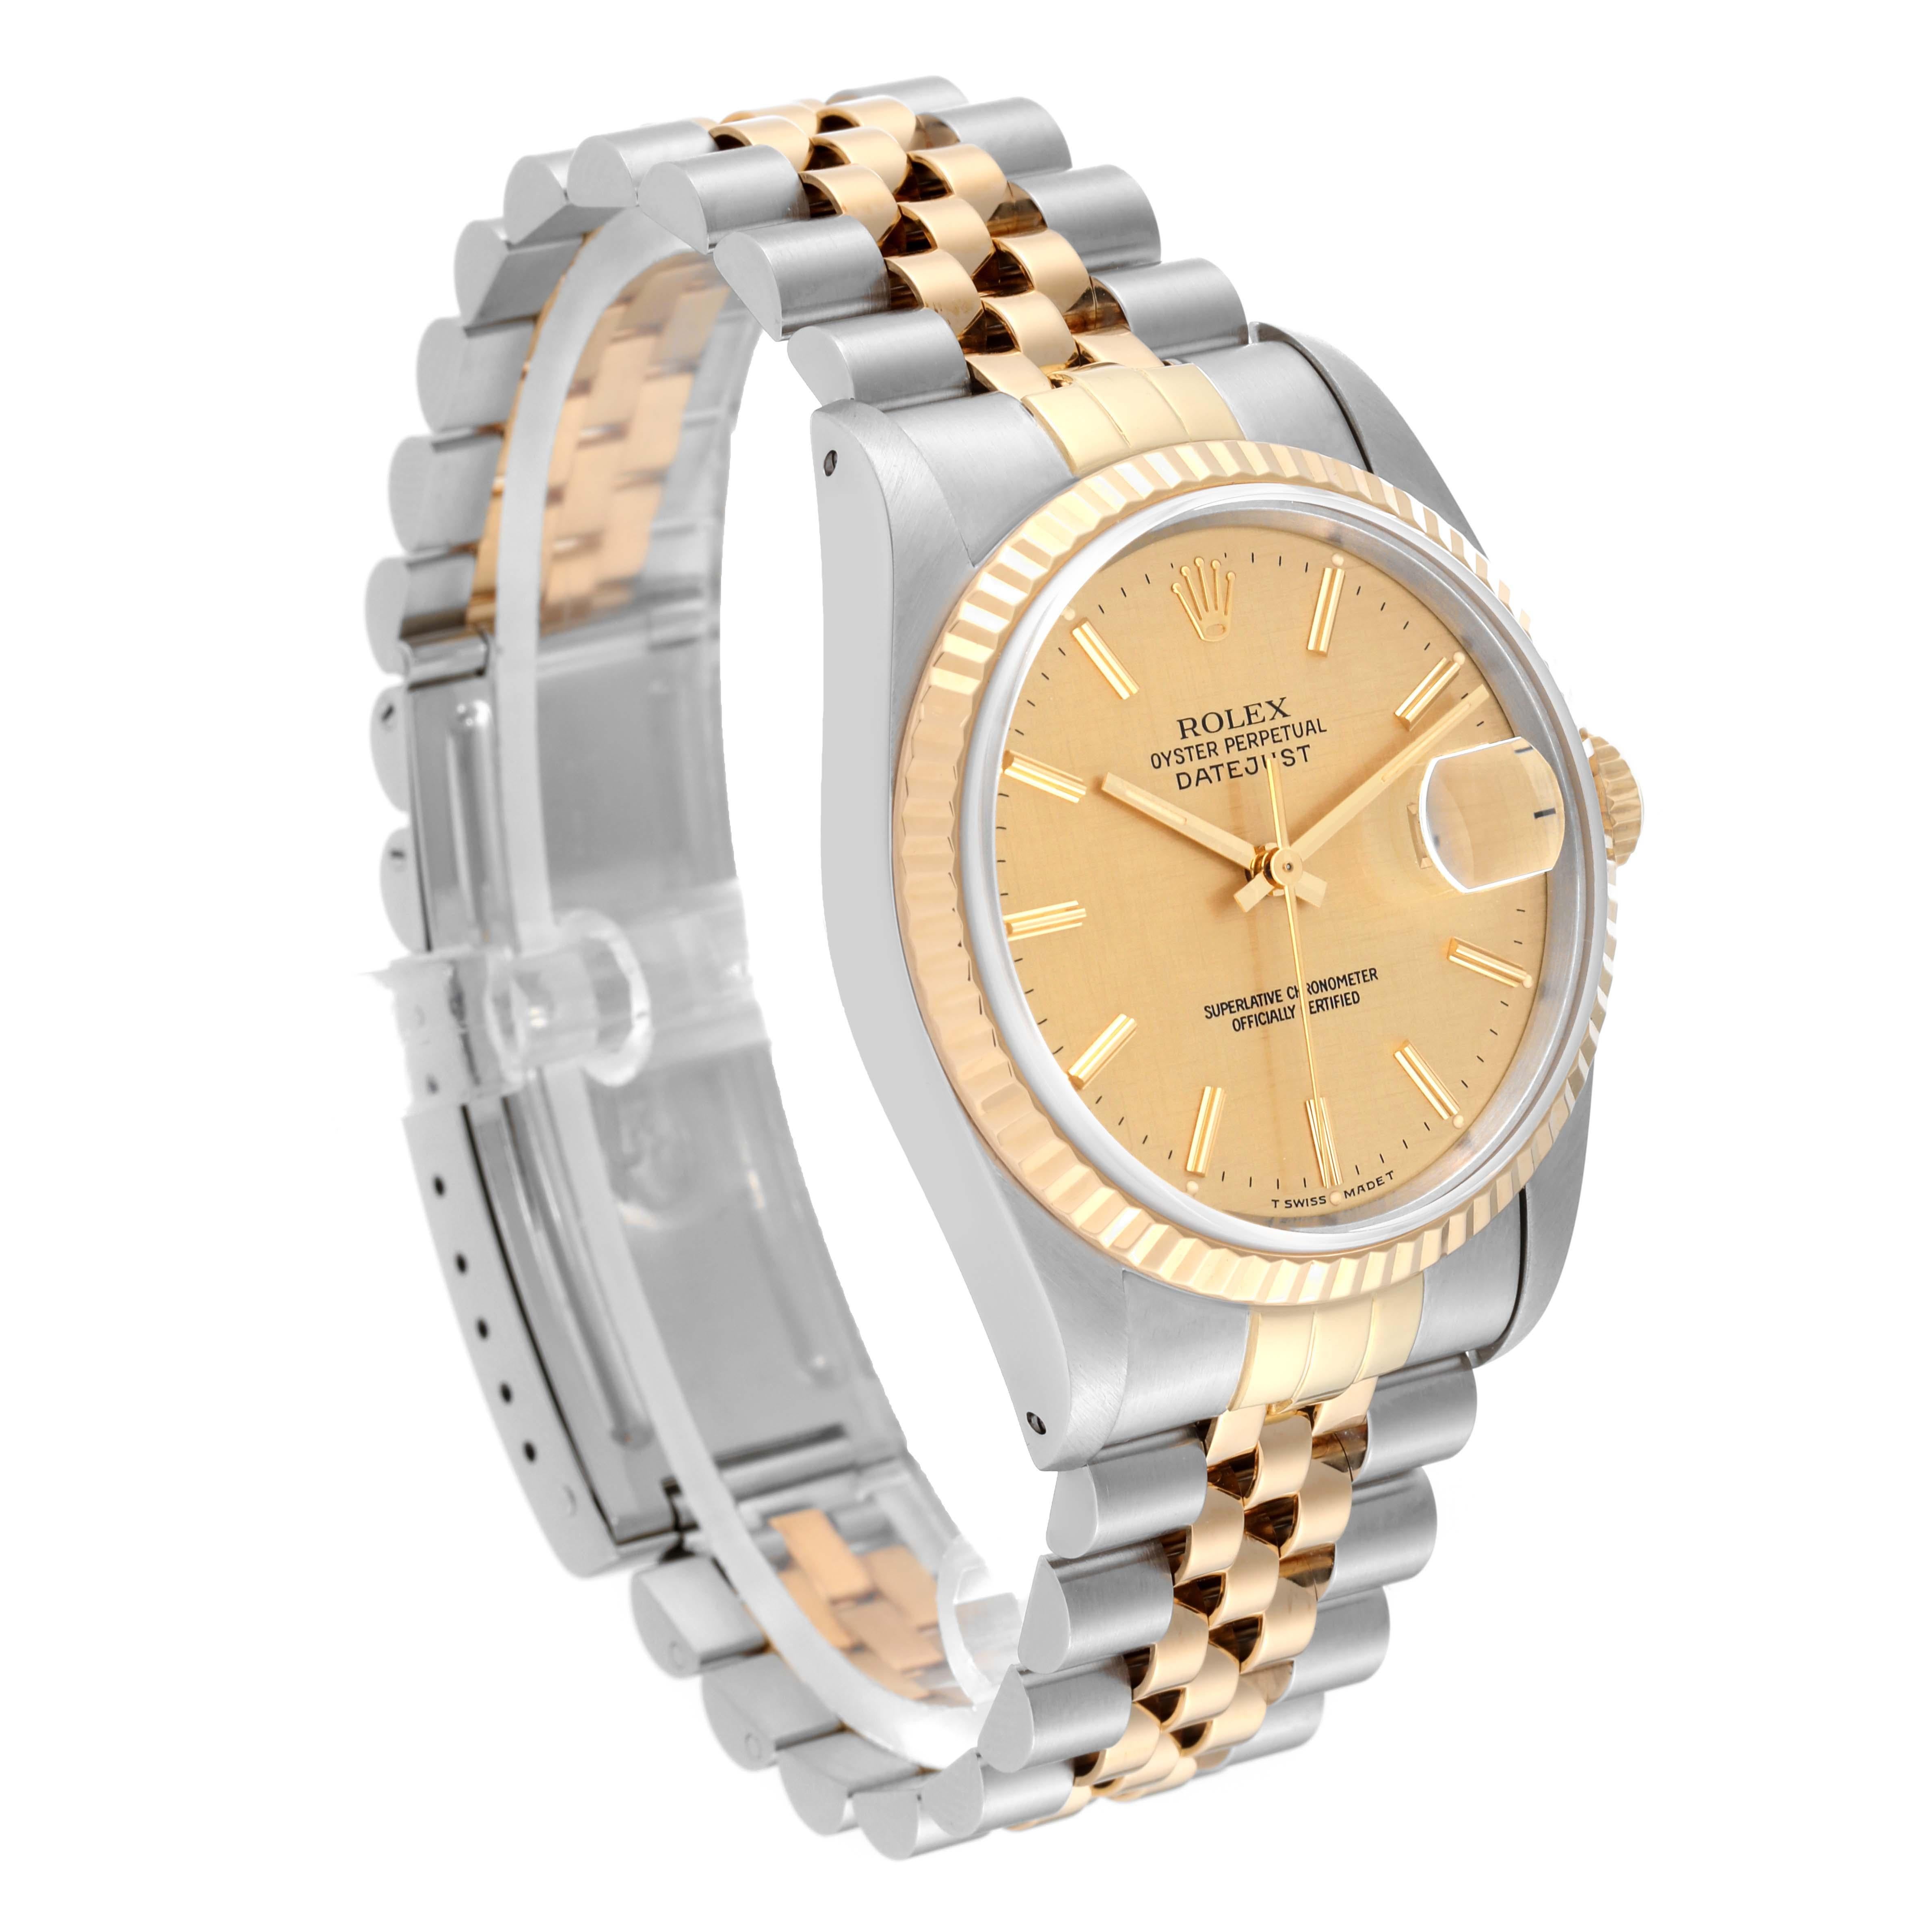 Rolex Datejust 36 Steel Yellow Gold Champagne Linen Dial Mens Watch 16233 For Sale 4